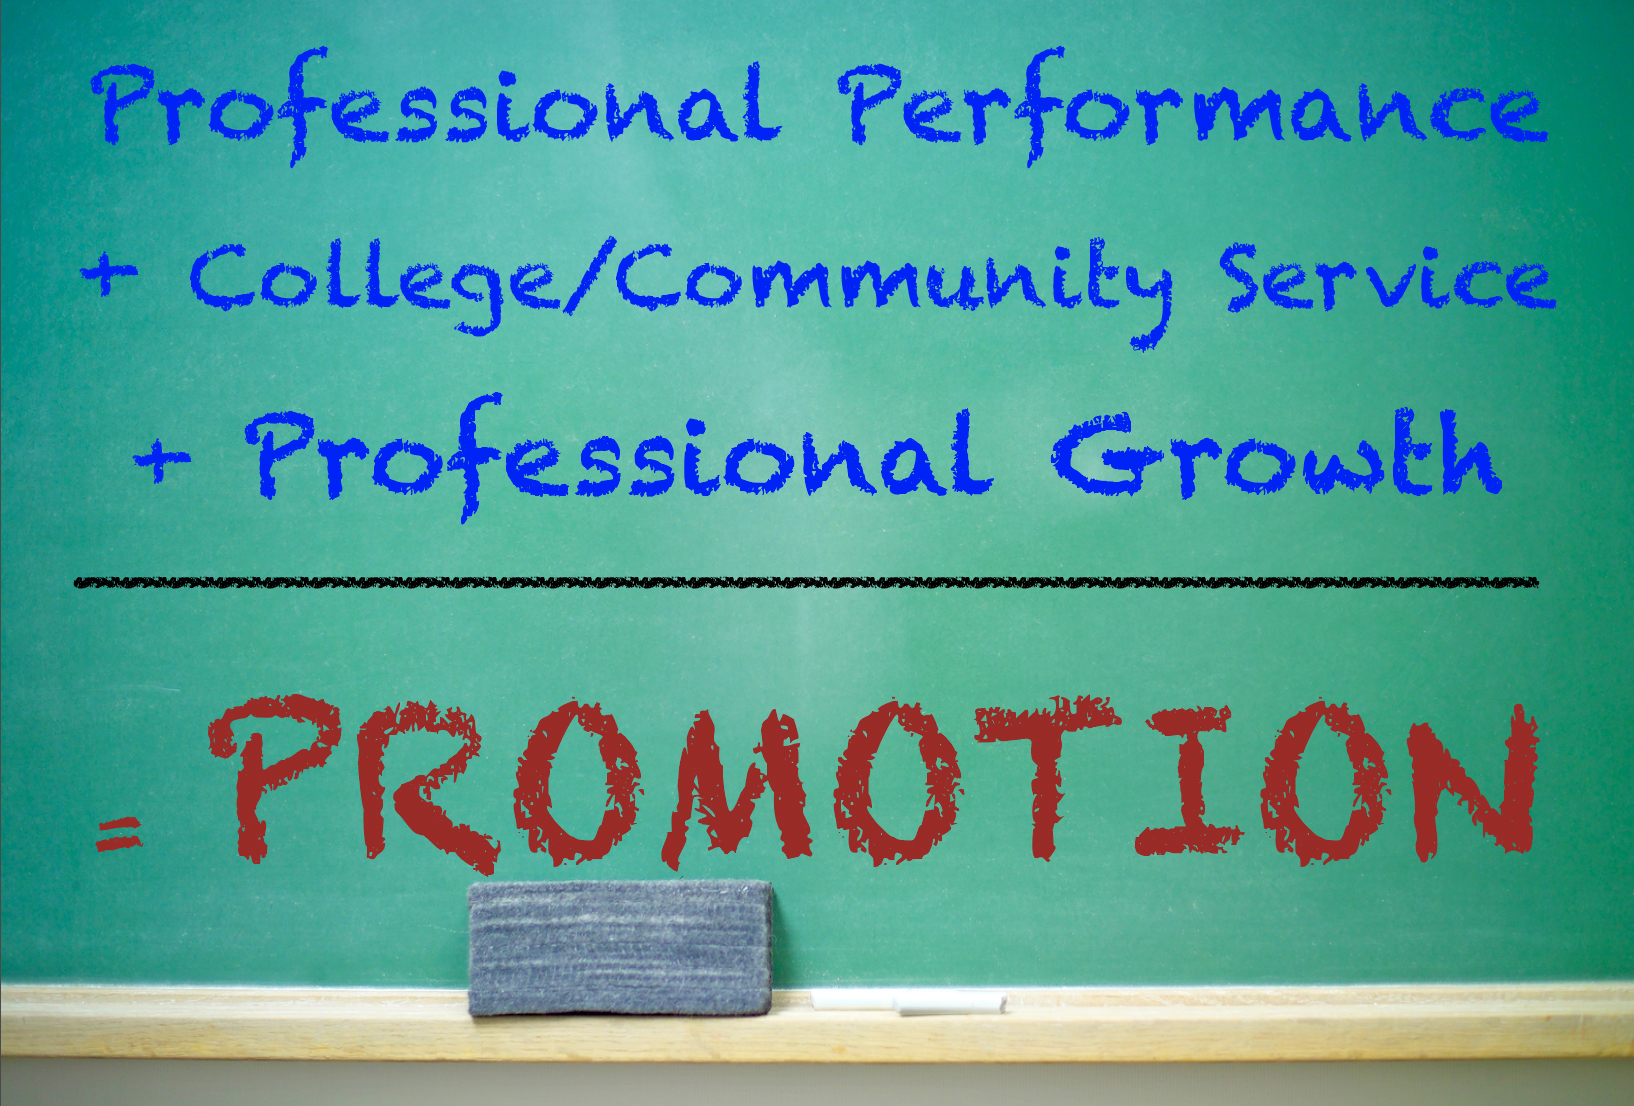 promotion requirements: performance, service, professional growth